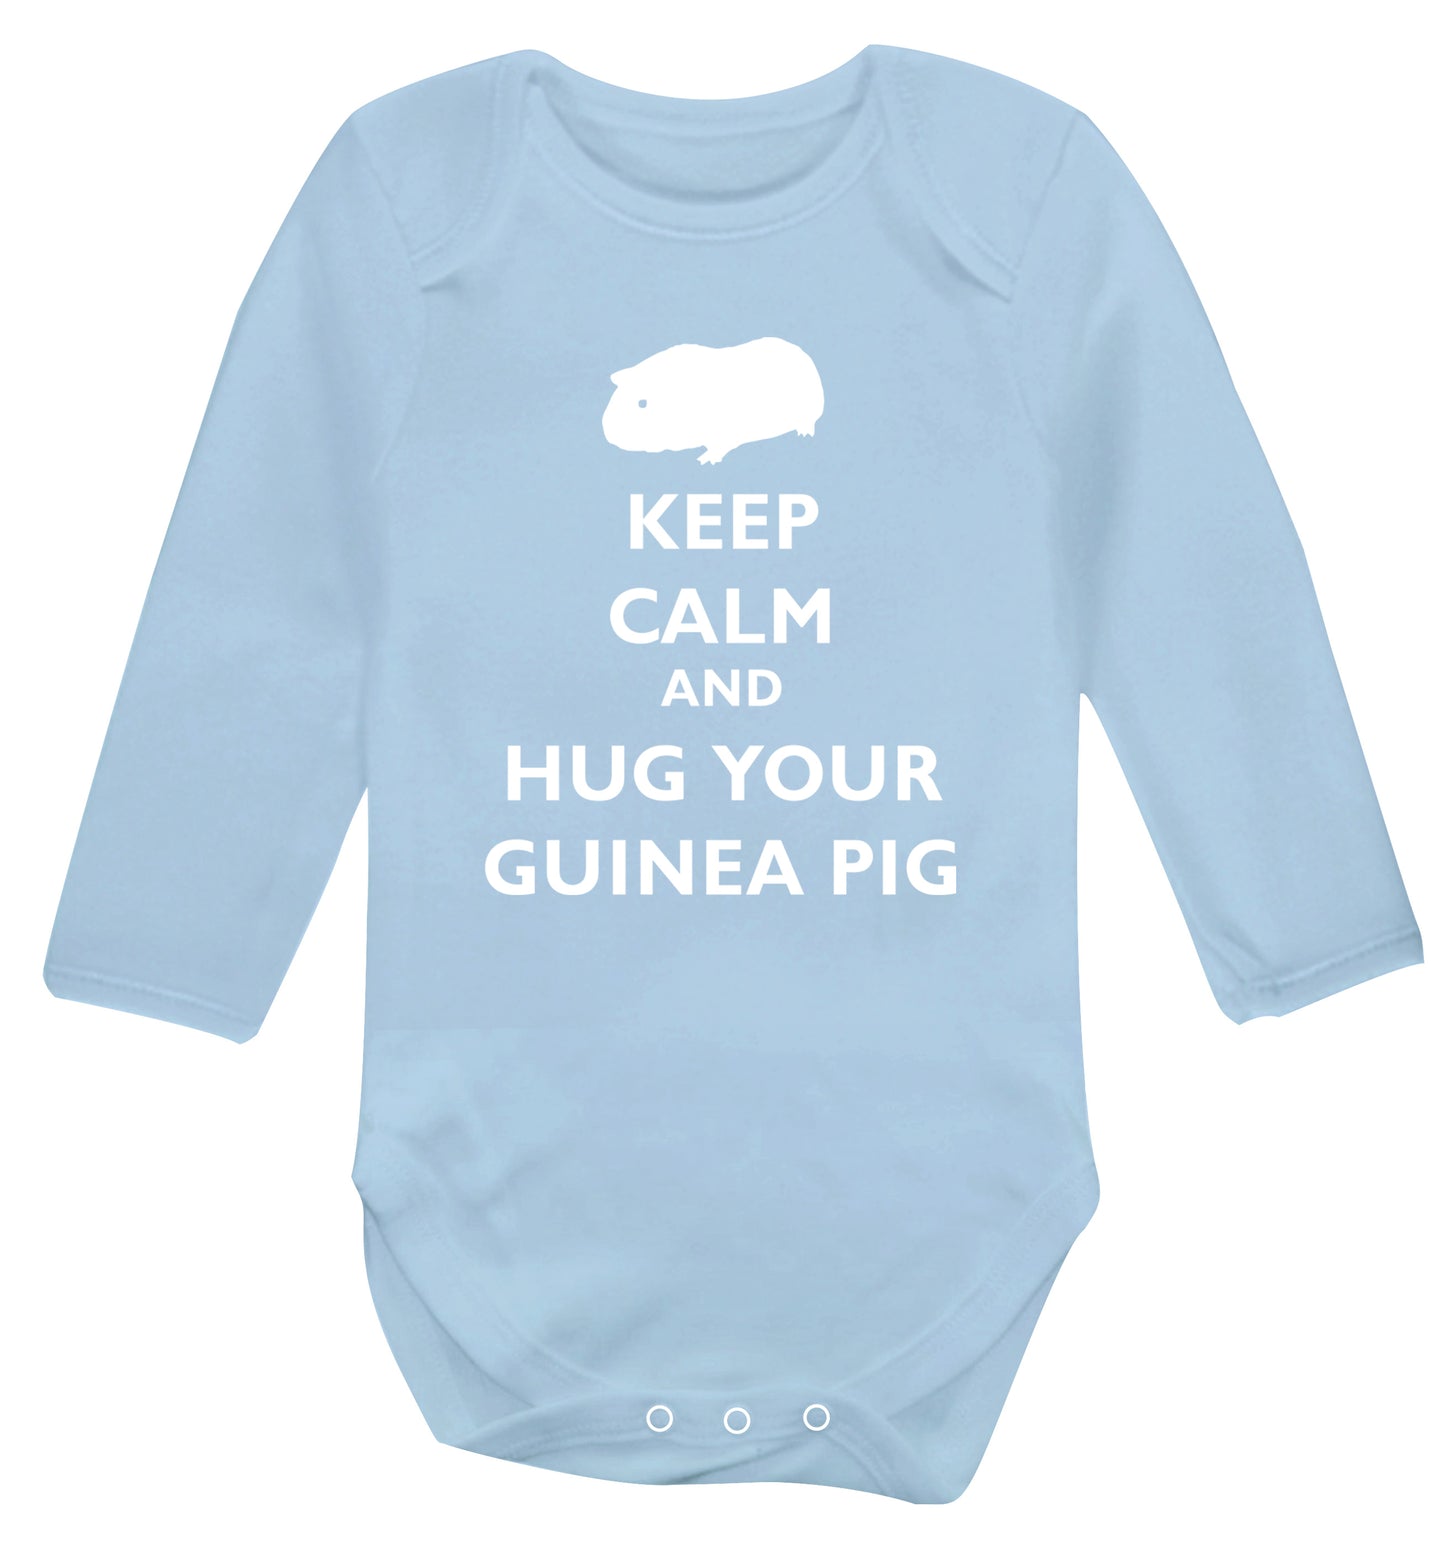 Keep calm and hug your guineapig Baby Vest long sleeved pale blue 6-12 months